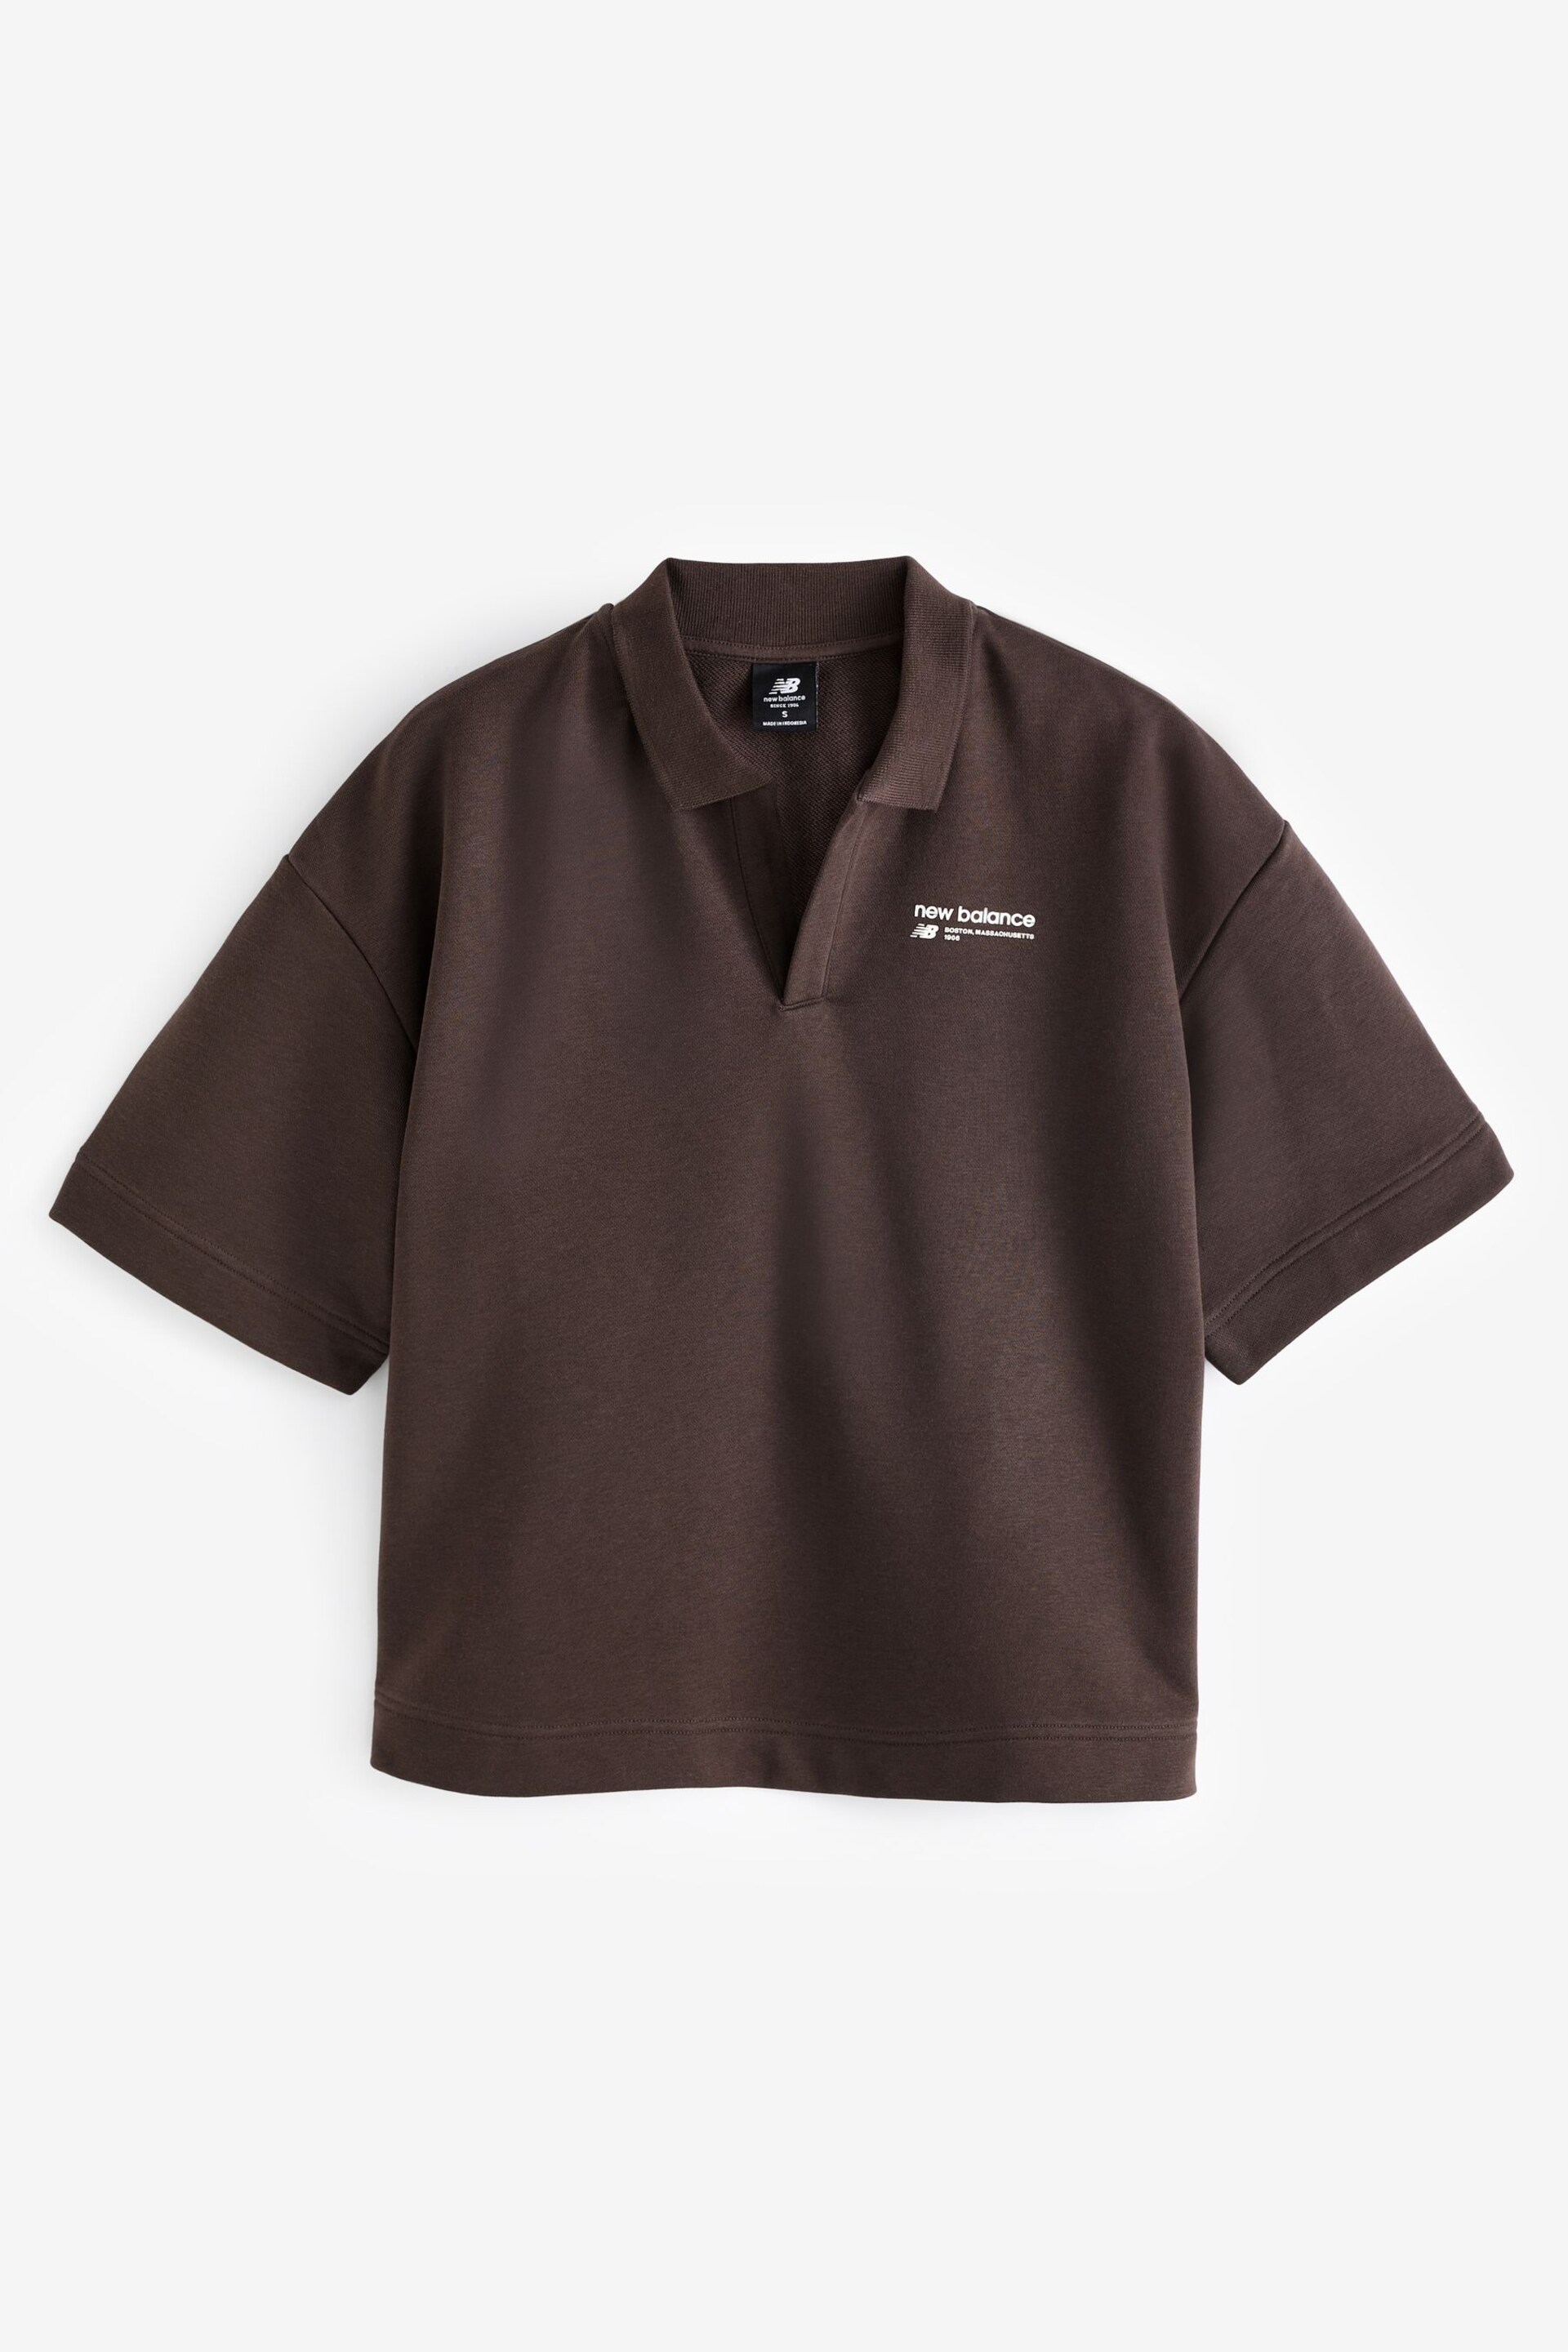 New Balance Brown Linear Heritage French Terry Polo Shirt - Image 5 of 5